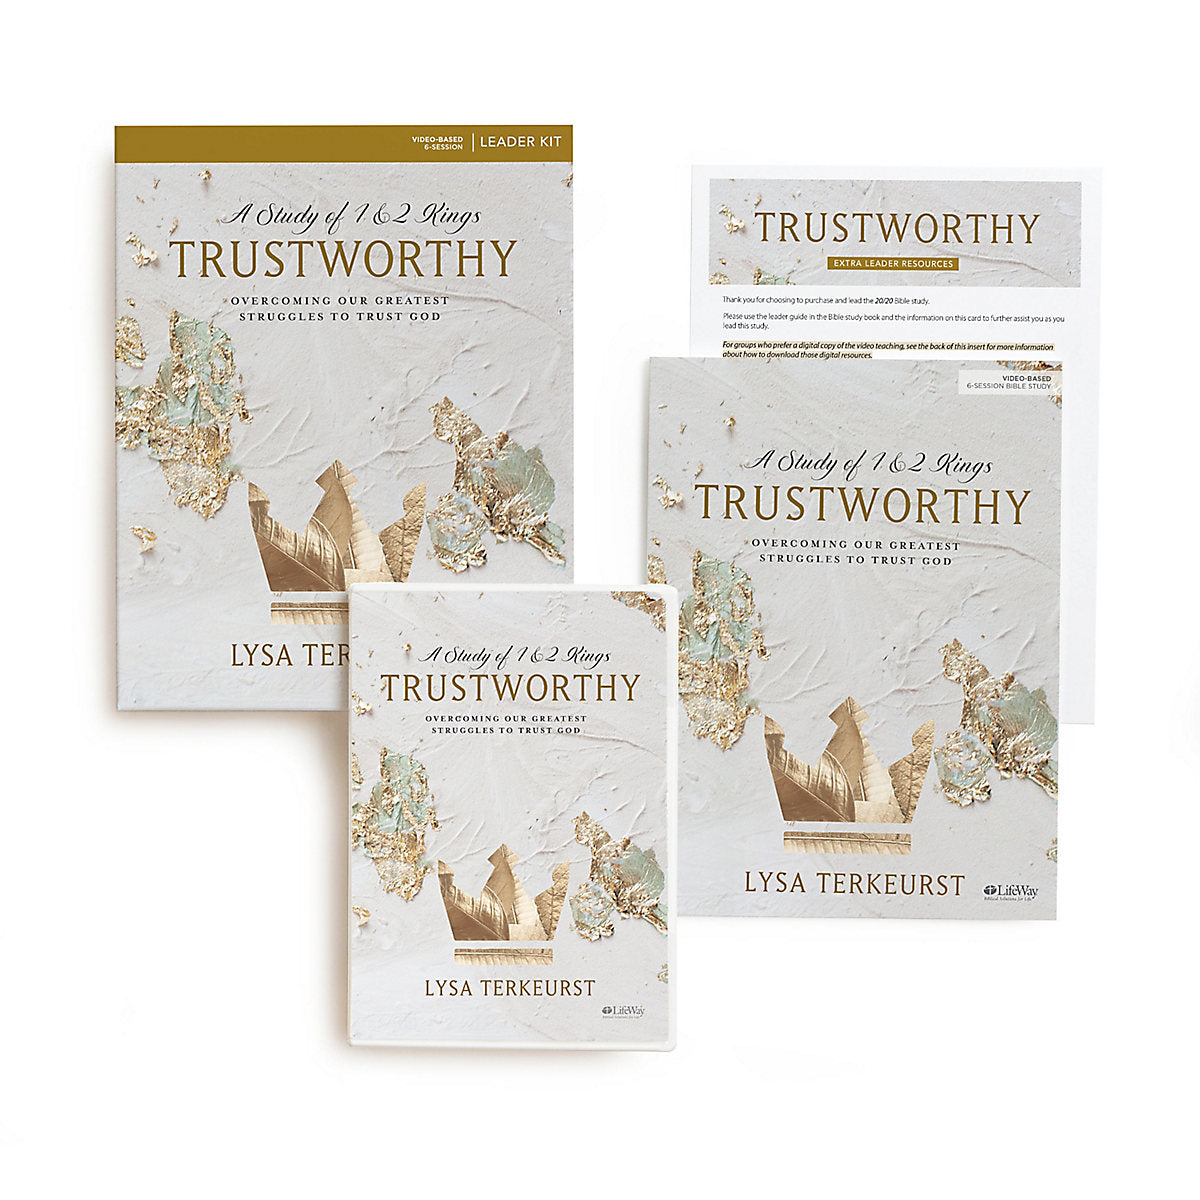 Trustworthy - Leader Kit Overcoming Our Greatest Struggles to Trust God Lysa TerKeurst (Not in Stock-Available to Order)